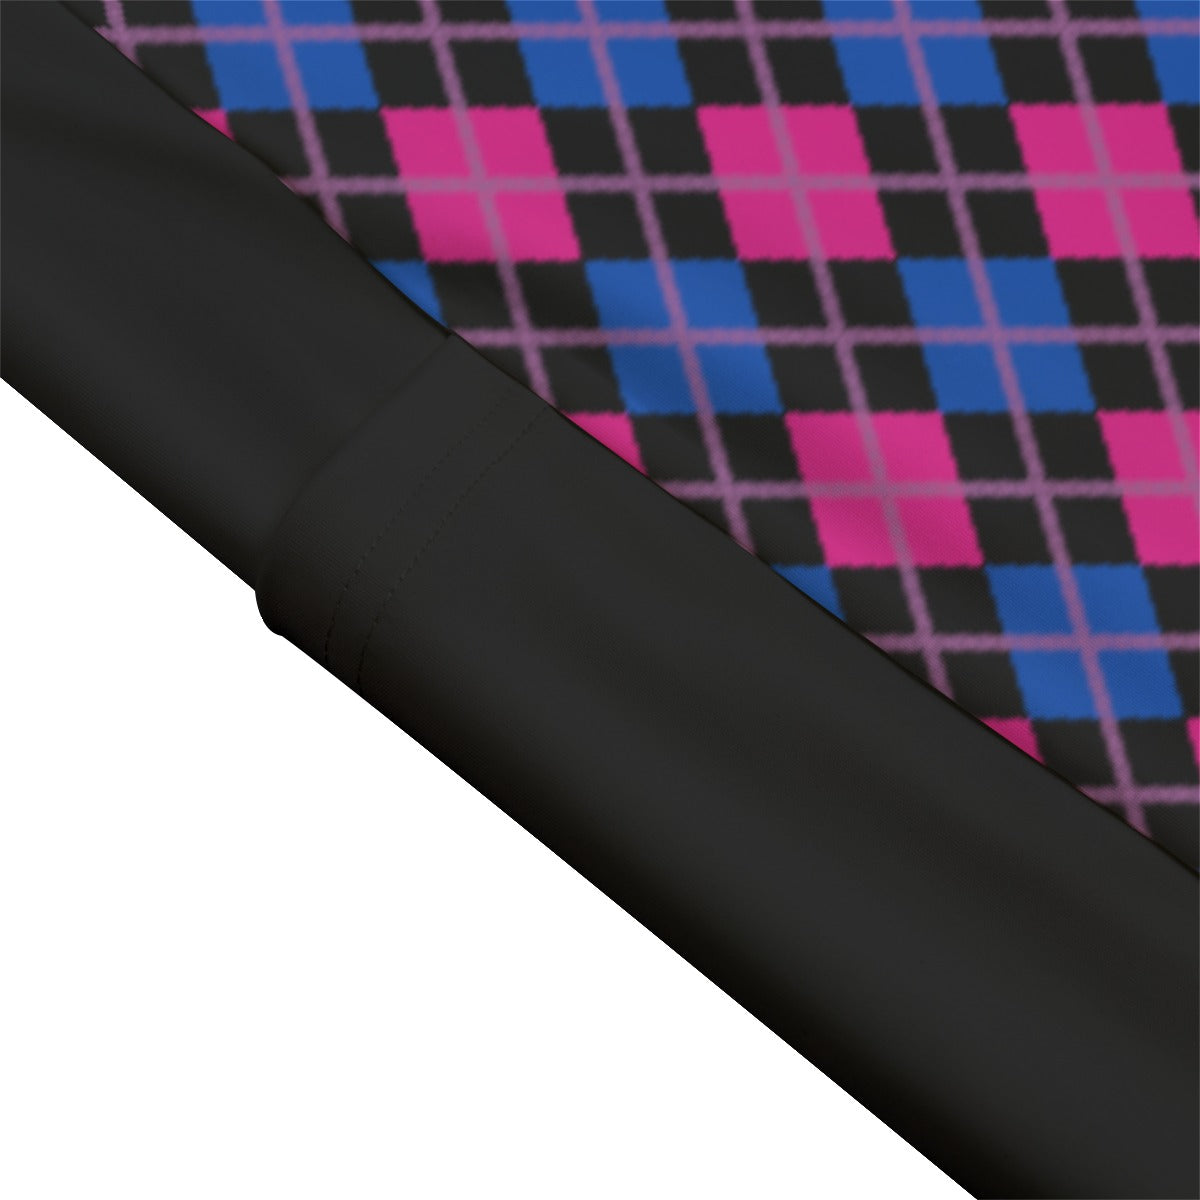 Pride Plaid or Argyle High Waist Leggings With Side Pockets | Choose Your Colourway